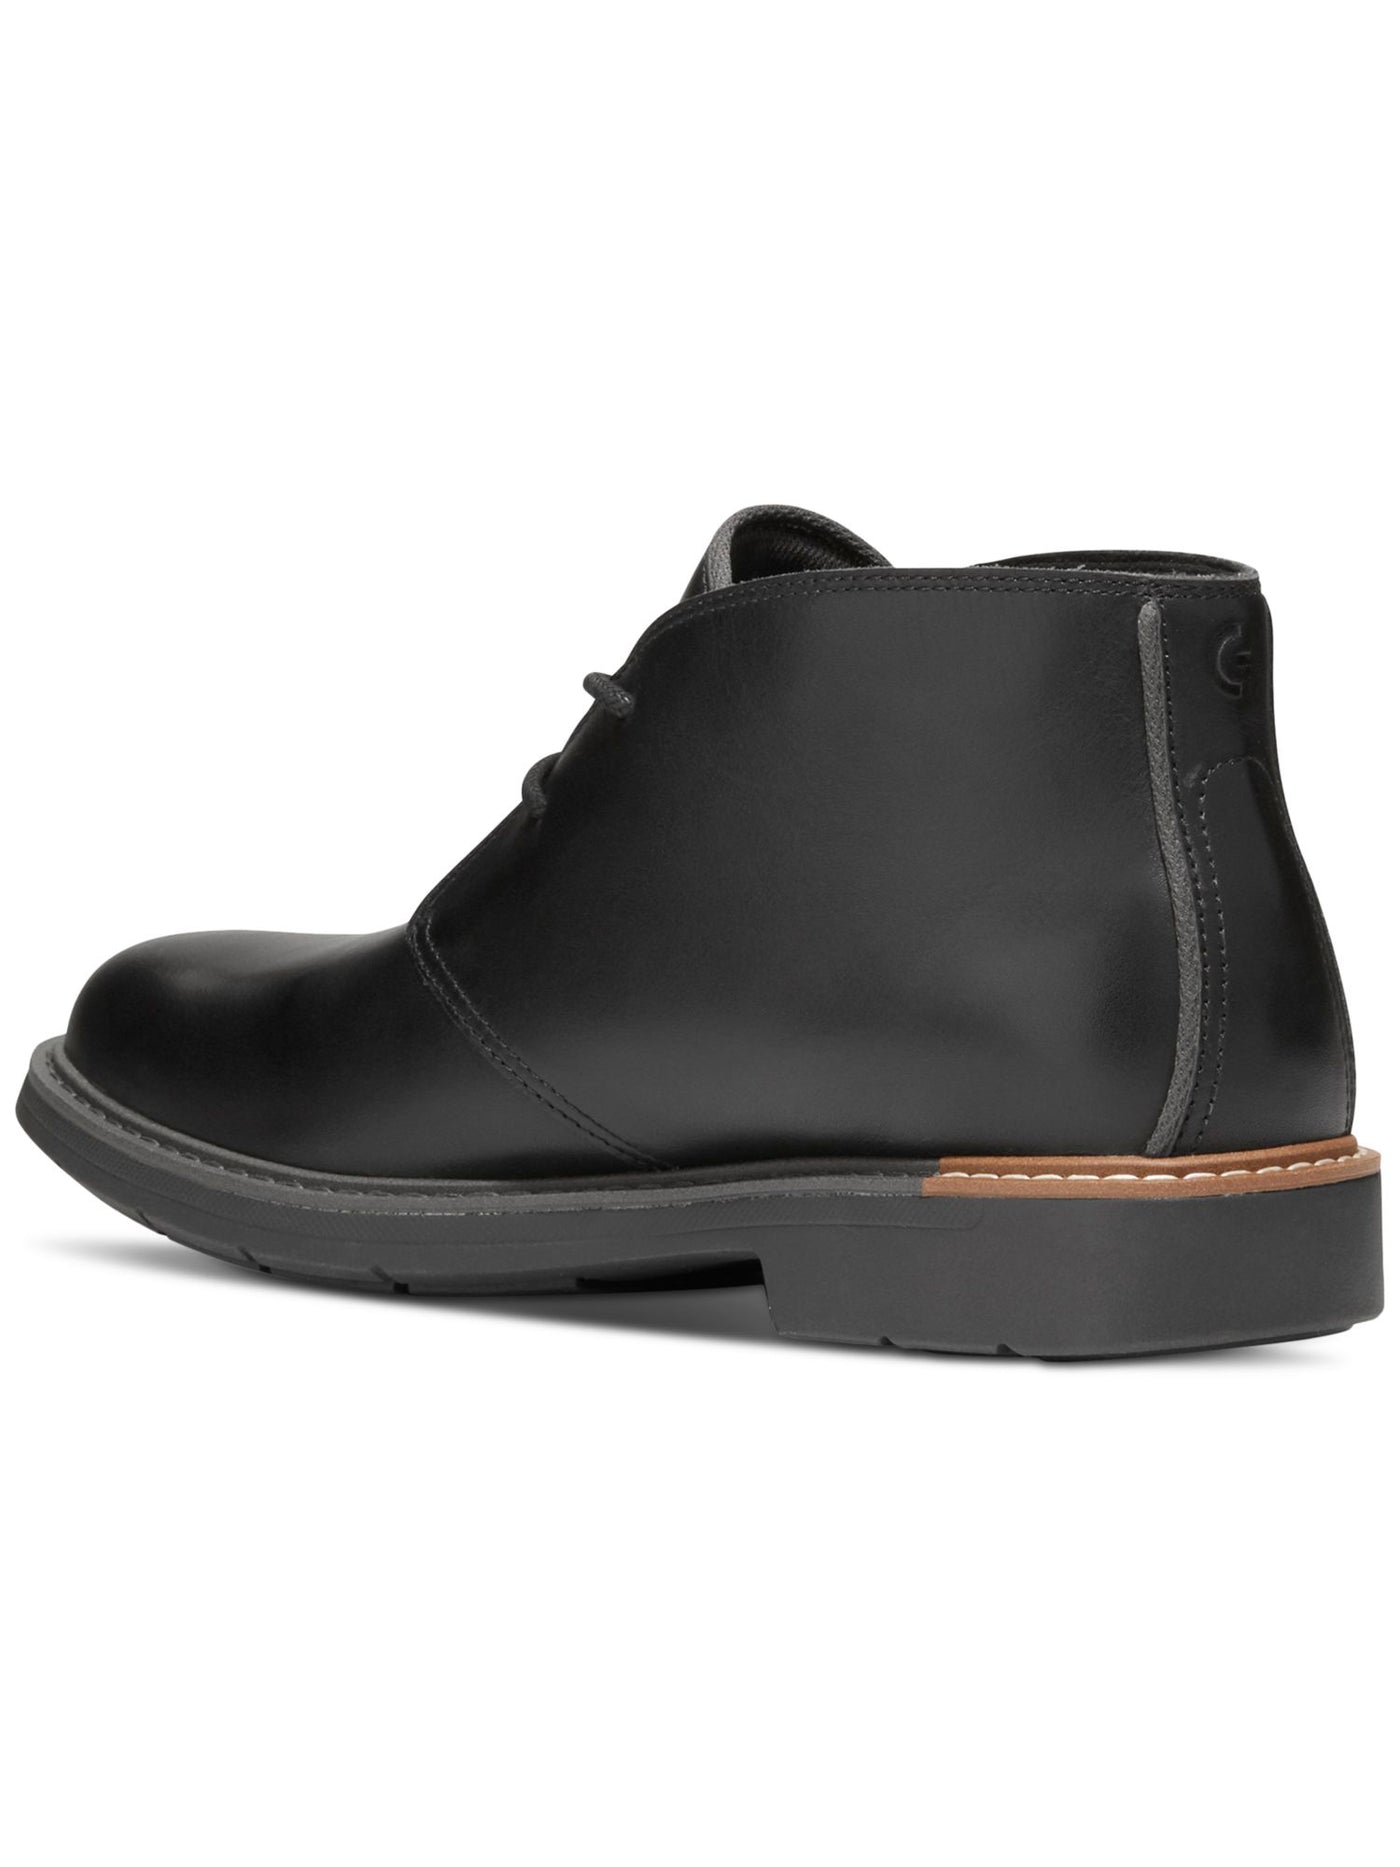 COLE HAAN Mens Black Cushioned Lightweight Go-to Round Toe Block Heel Lace-Up Chukka Boots 7 M